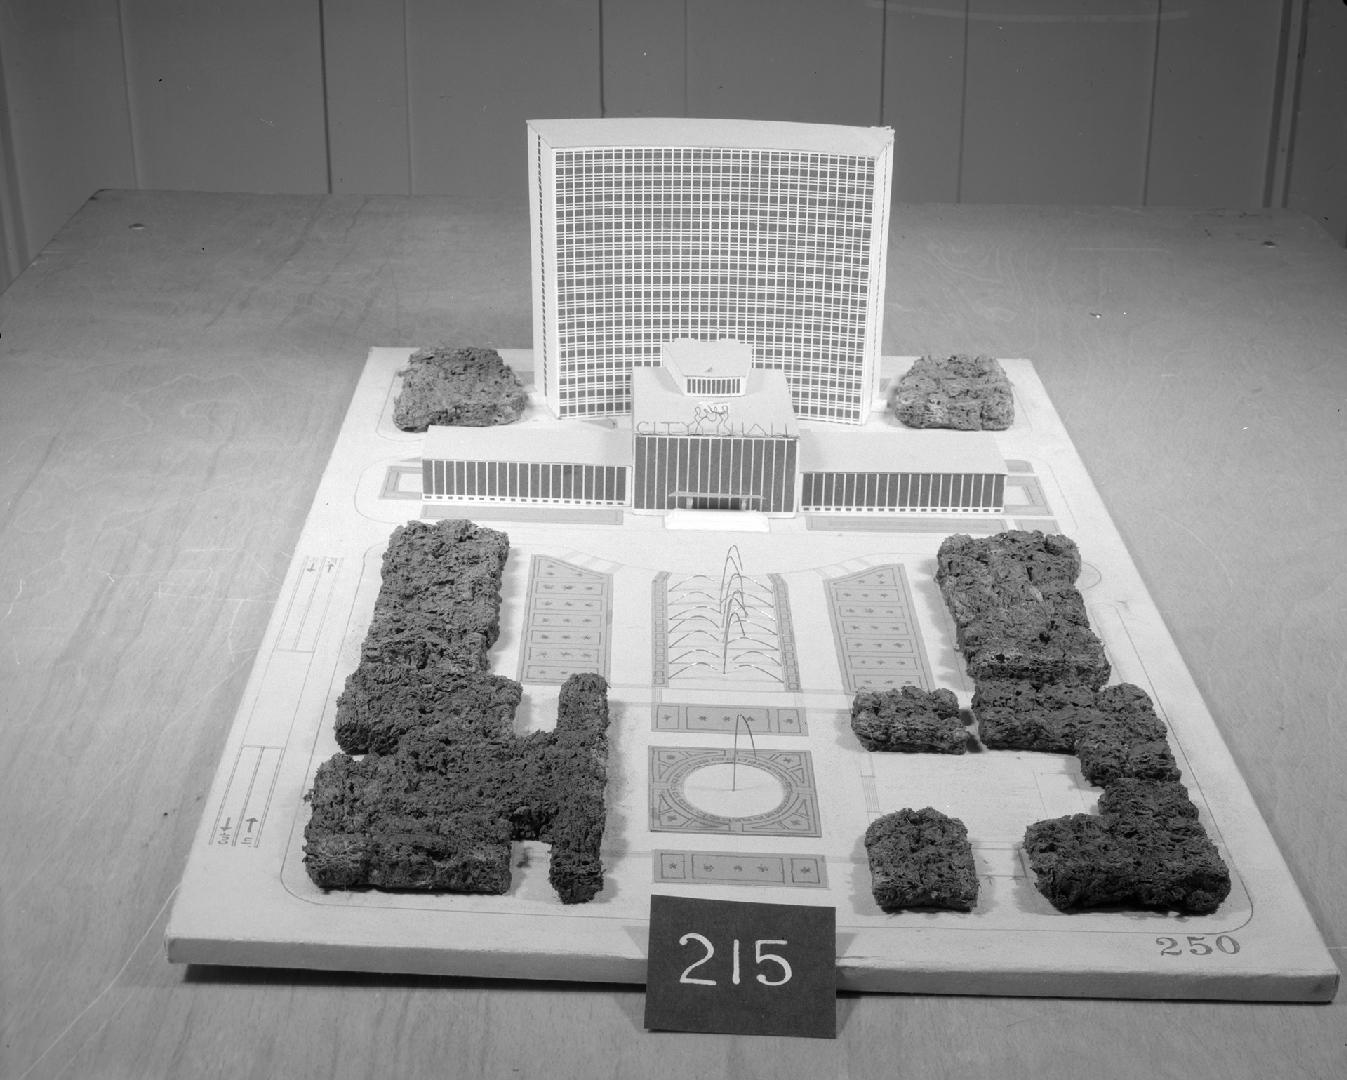 Jose M. Bustinduy Rodriguez entry, City Hall and Square Competition, Toronto, 1958, architectural model